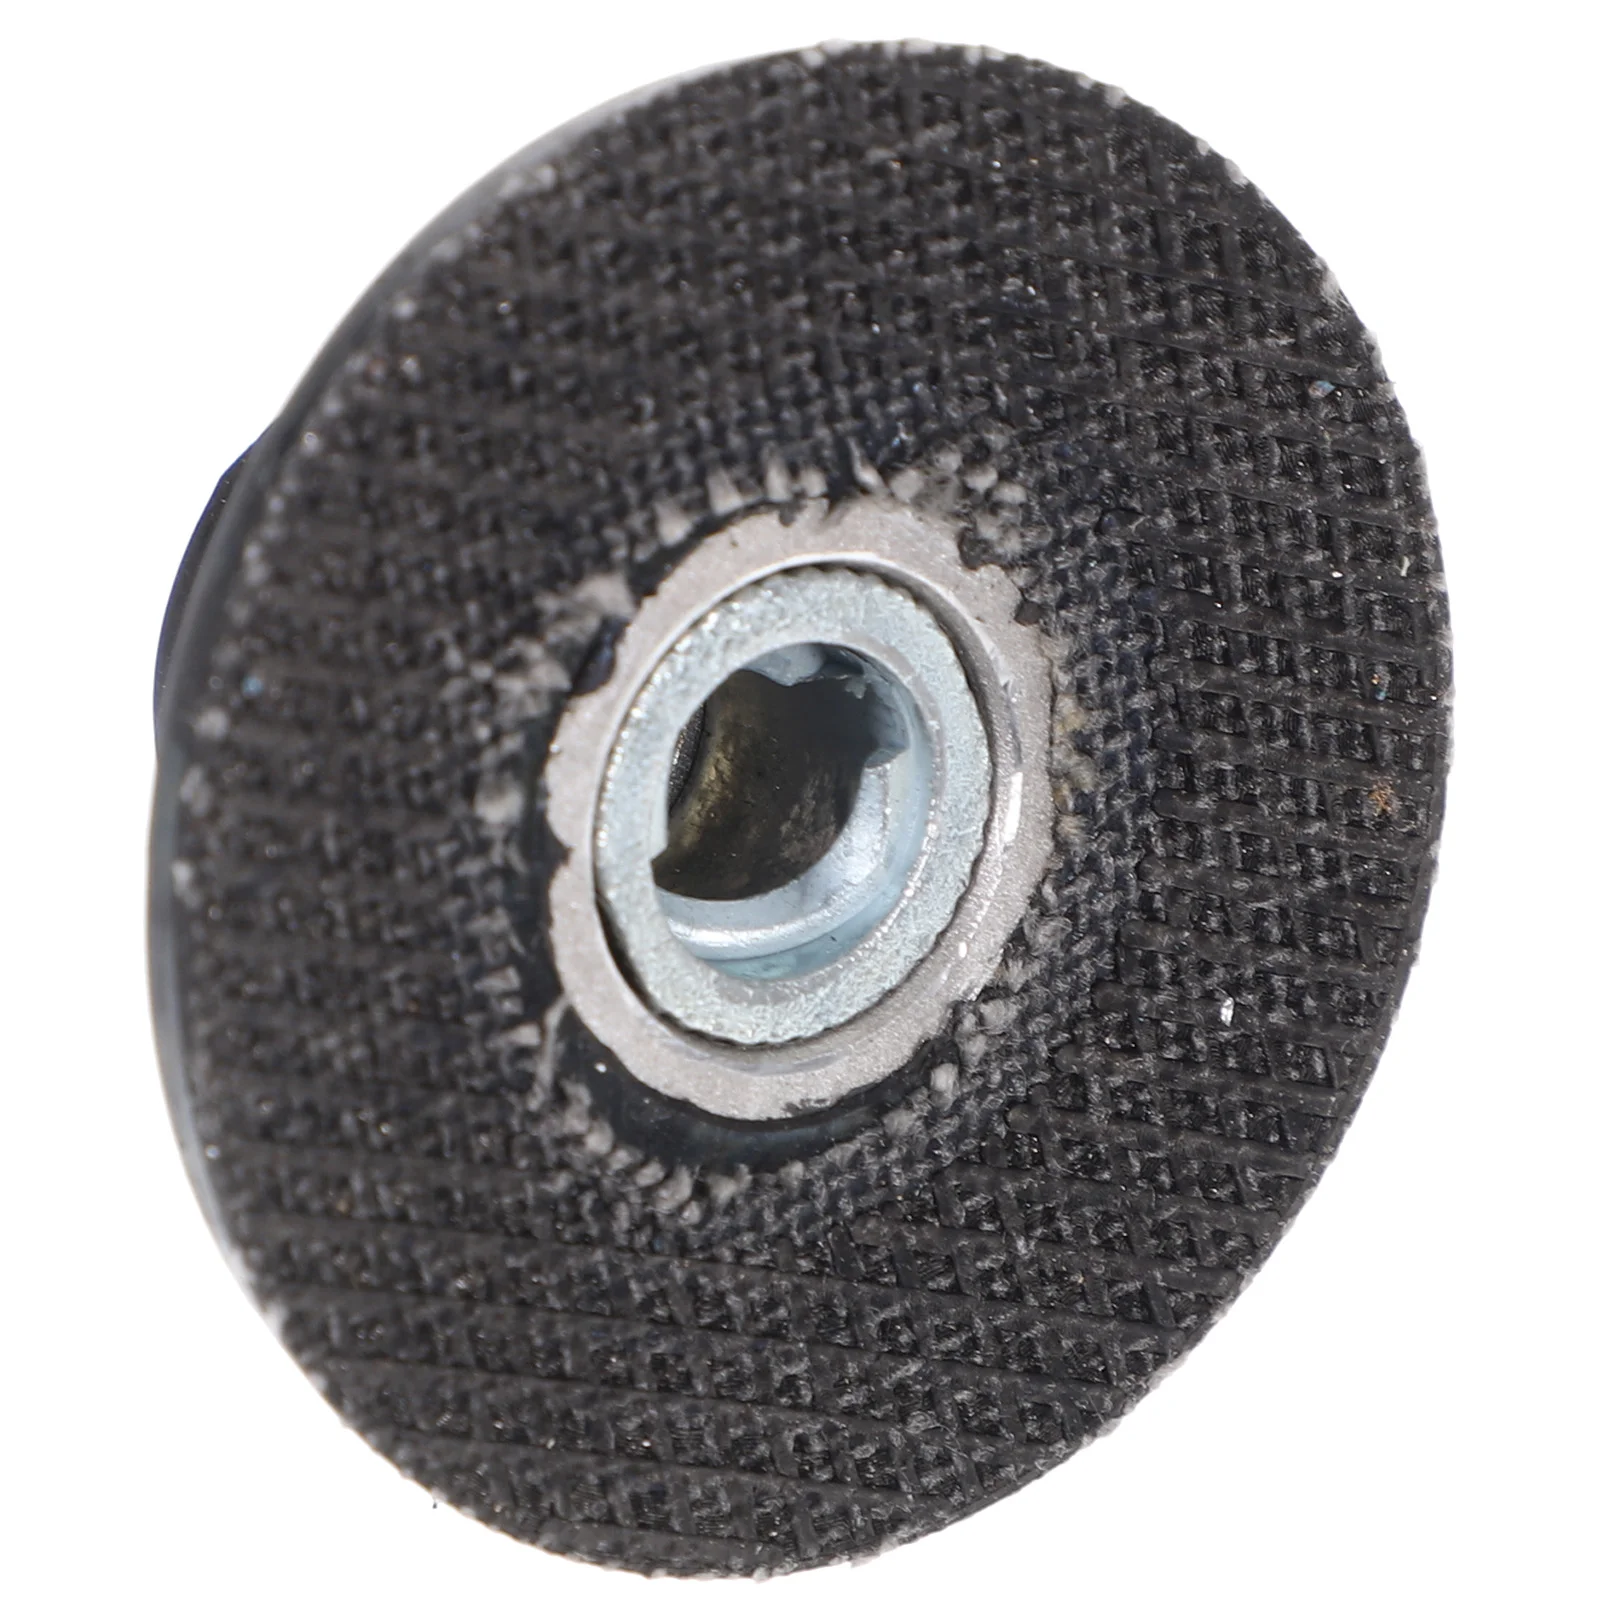 1 Set Flap Disc Sanding Flap Buffing Wheels For Drills For Angle Grinder Abrasive Buffing Wheel For Angle